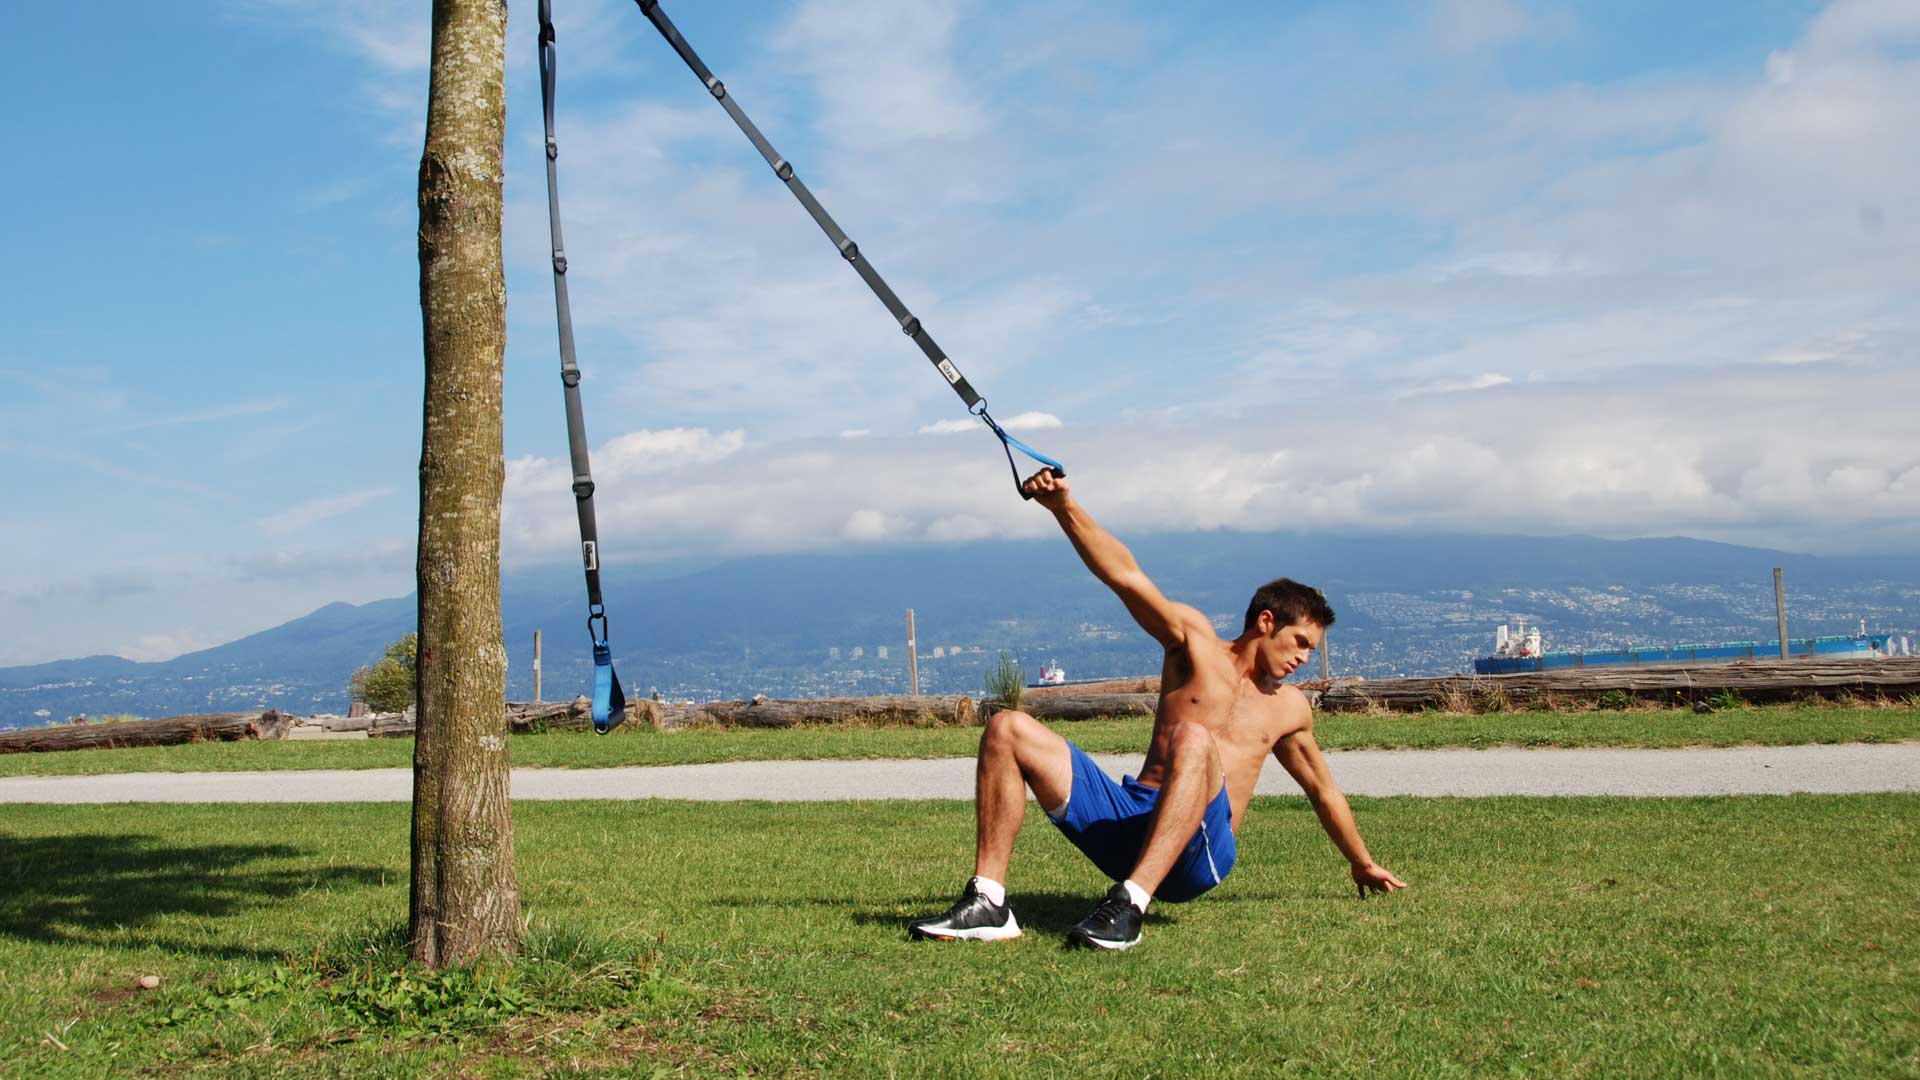 The Human Trainer Suspension Trainer is the industries best bodyweight tool for indoor and outdoor exercise to build strength and conditioning.